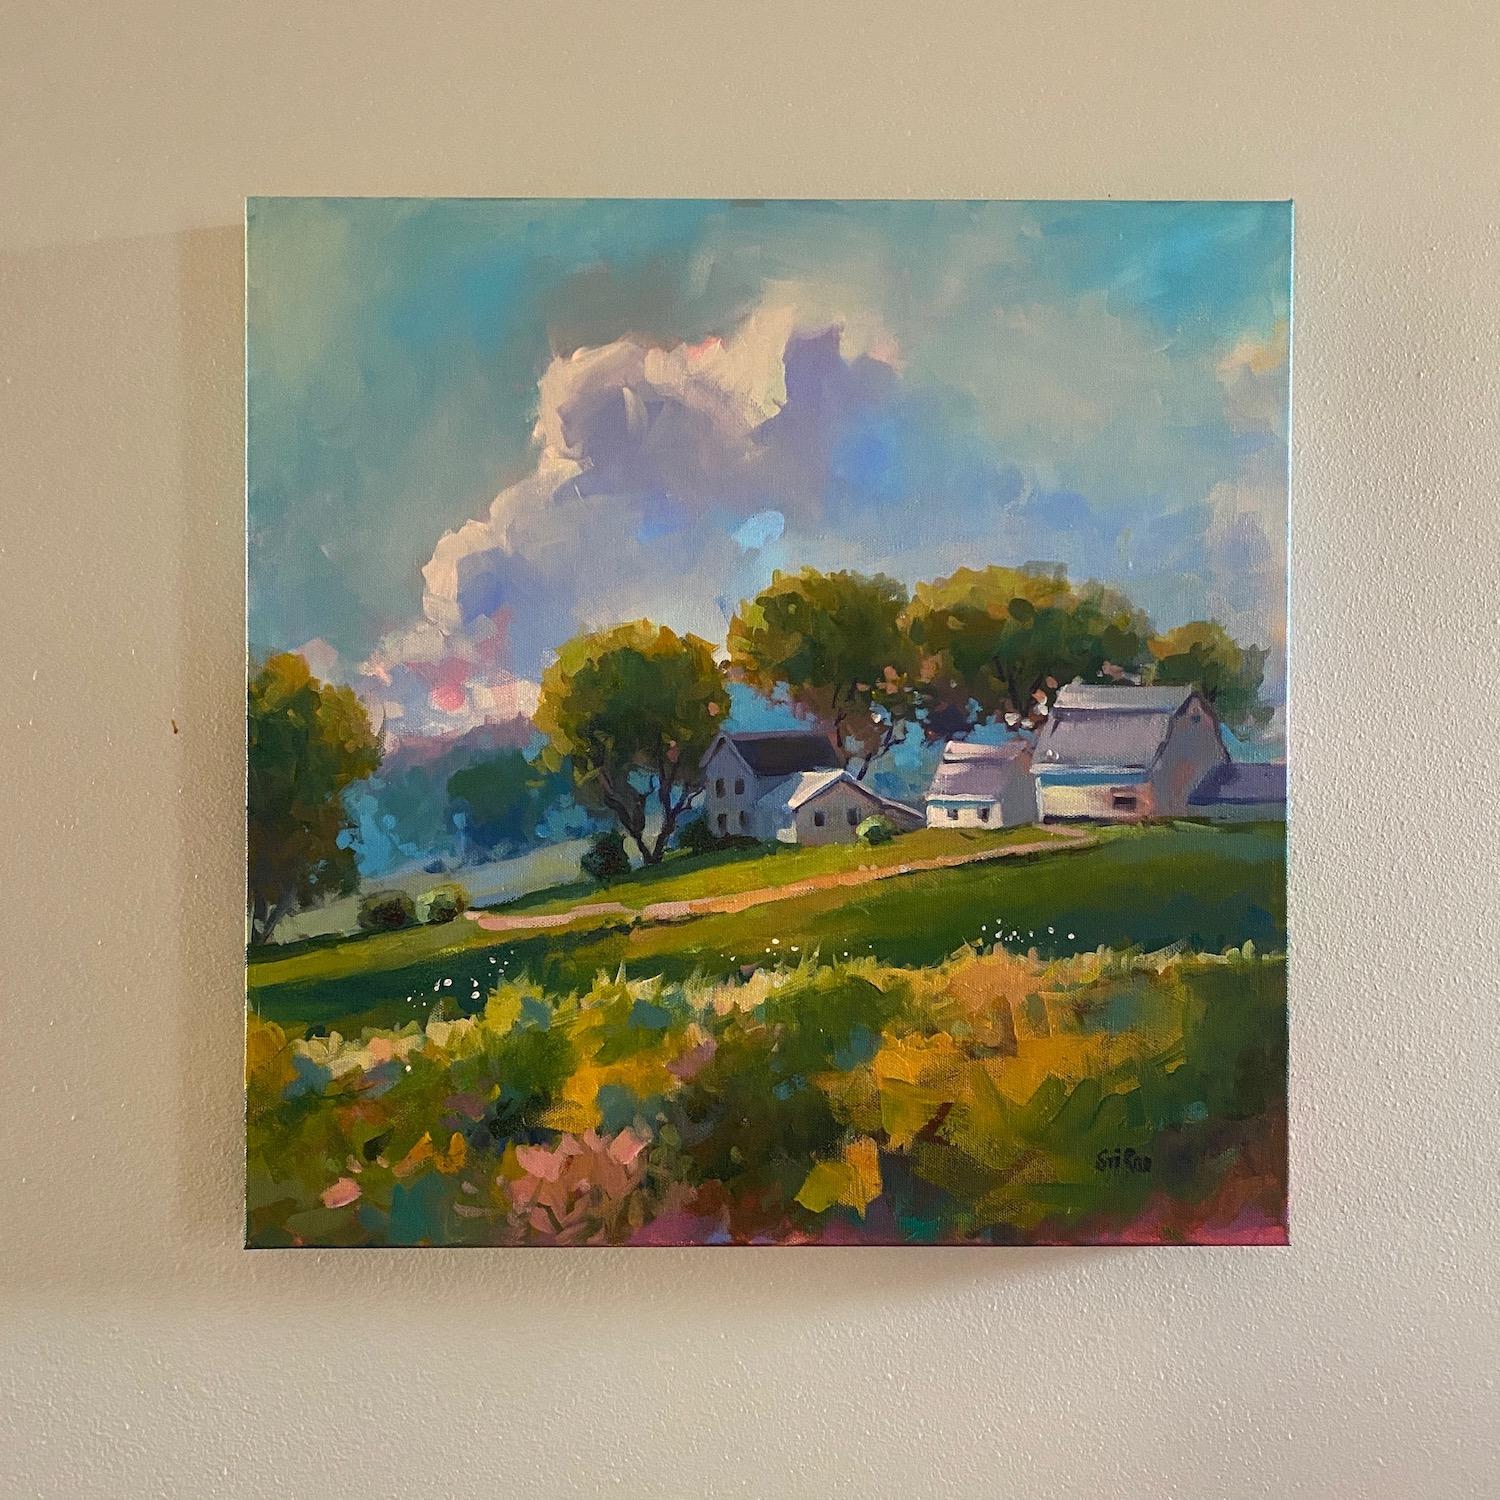 <p>Artist Comments<br>Artist Sri Rao portrays an idyllic morning in the heart of Iowa's countryside. The sun timidly peeks from a veil of clouds, casting a soft, golden glow across the landscape. The misty atmosphere offers the composition a sense